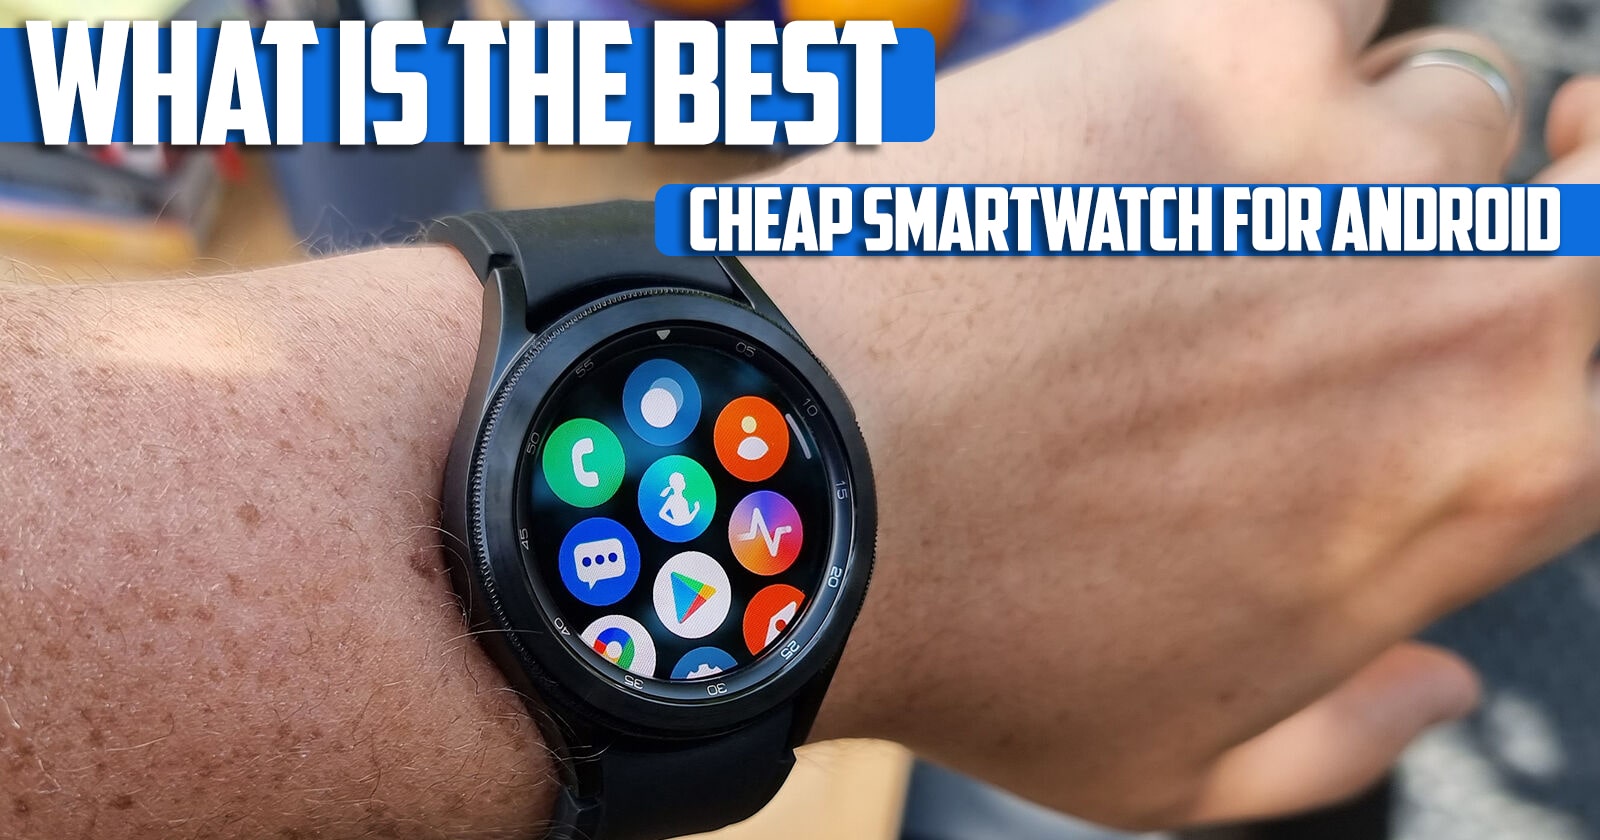 What Is the Best Cheap Smartwatch for Android